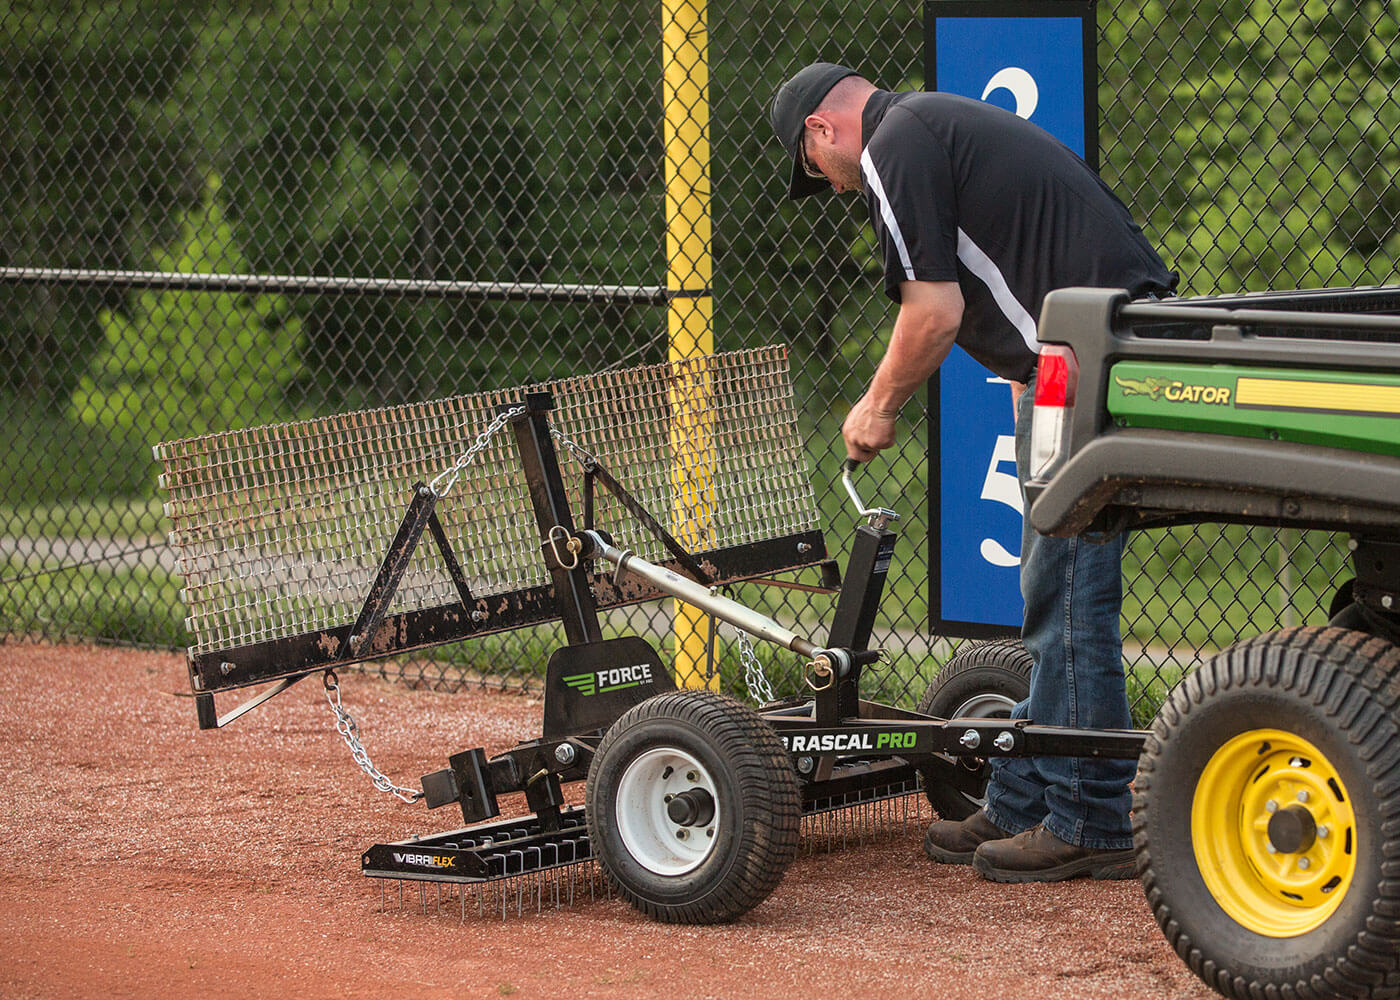 Man adjusting attachment on infield rascal pro pull-behind groomer with vibraflex and rigid drag mat attachment